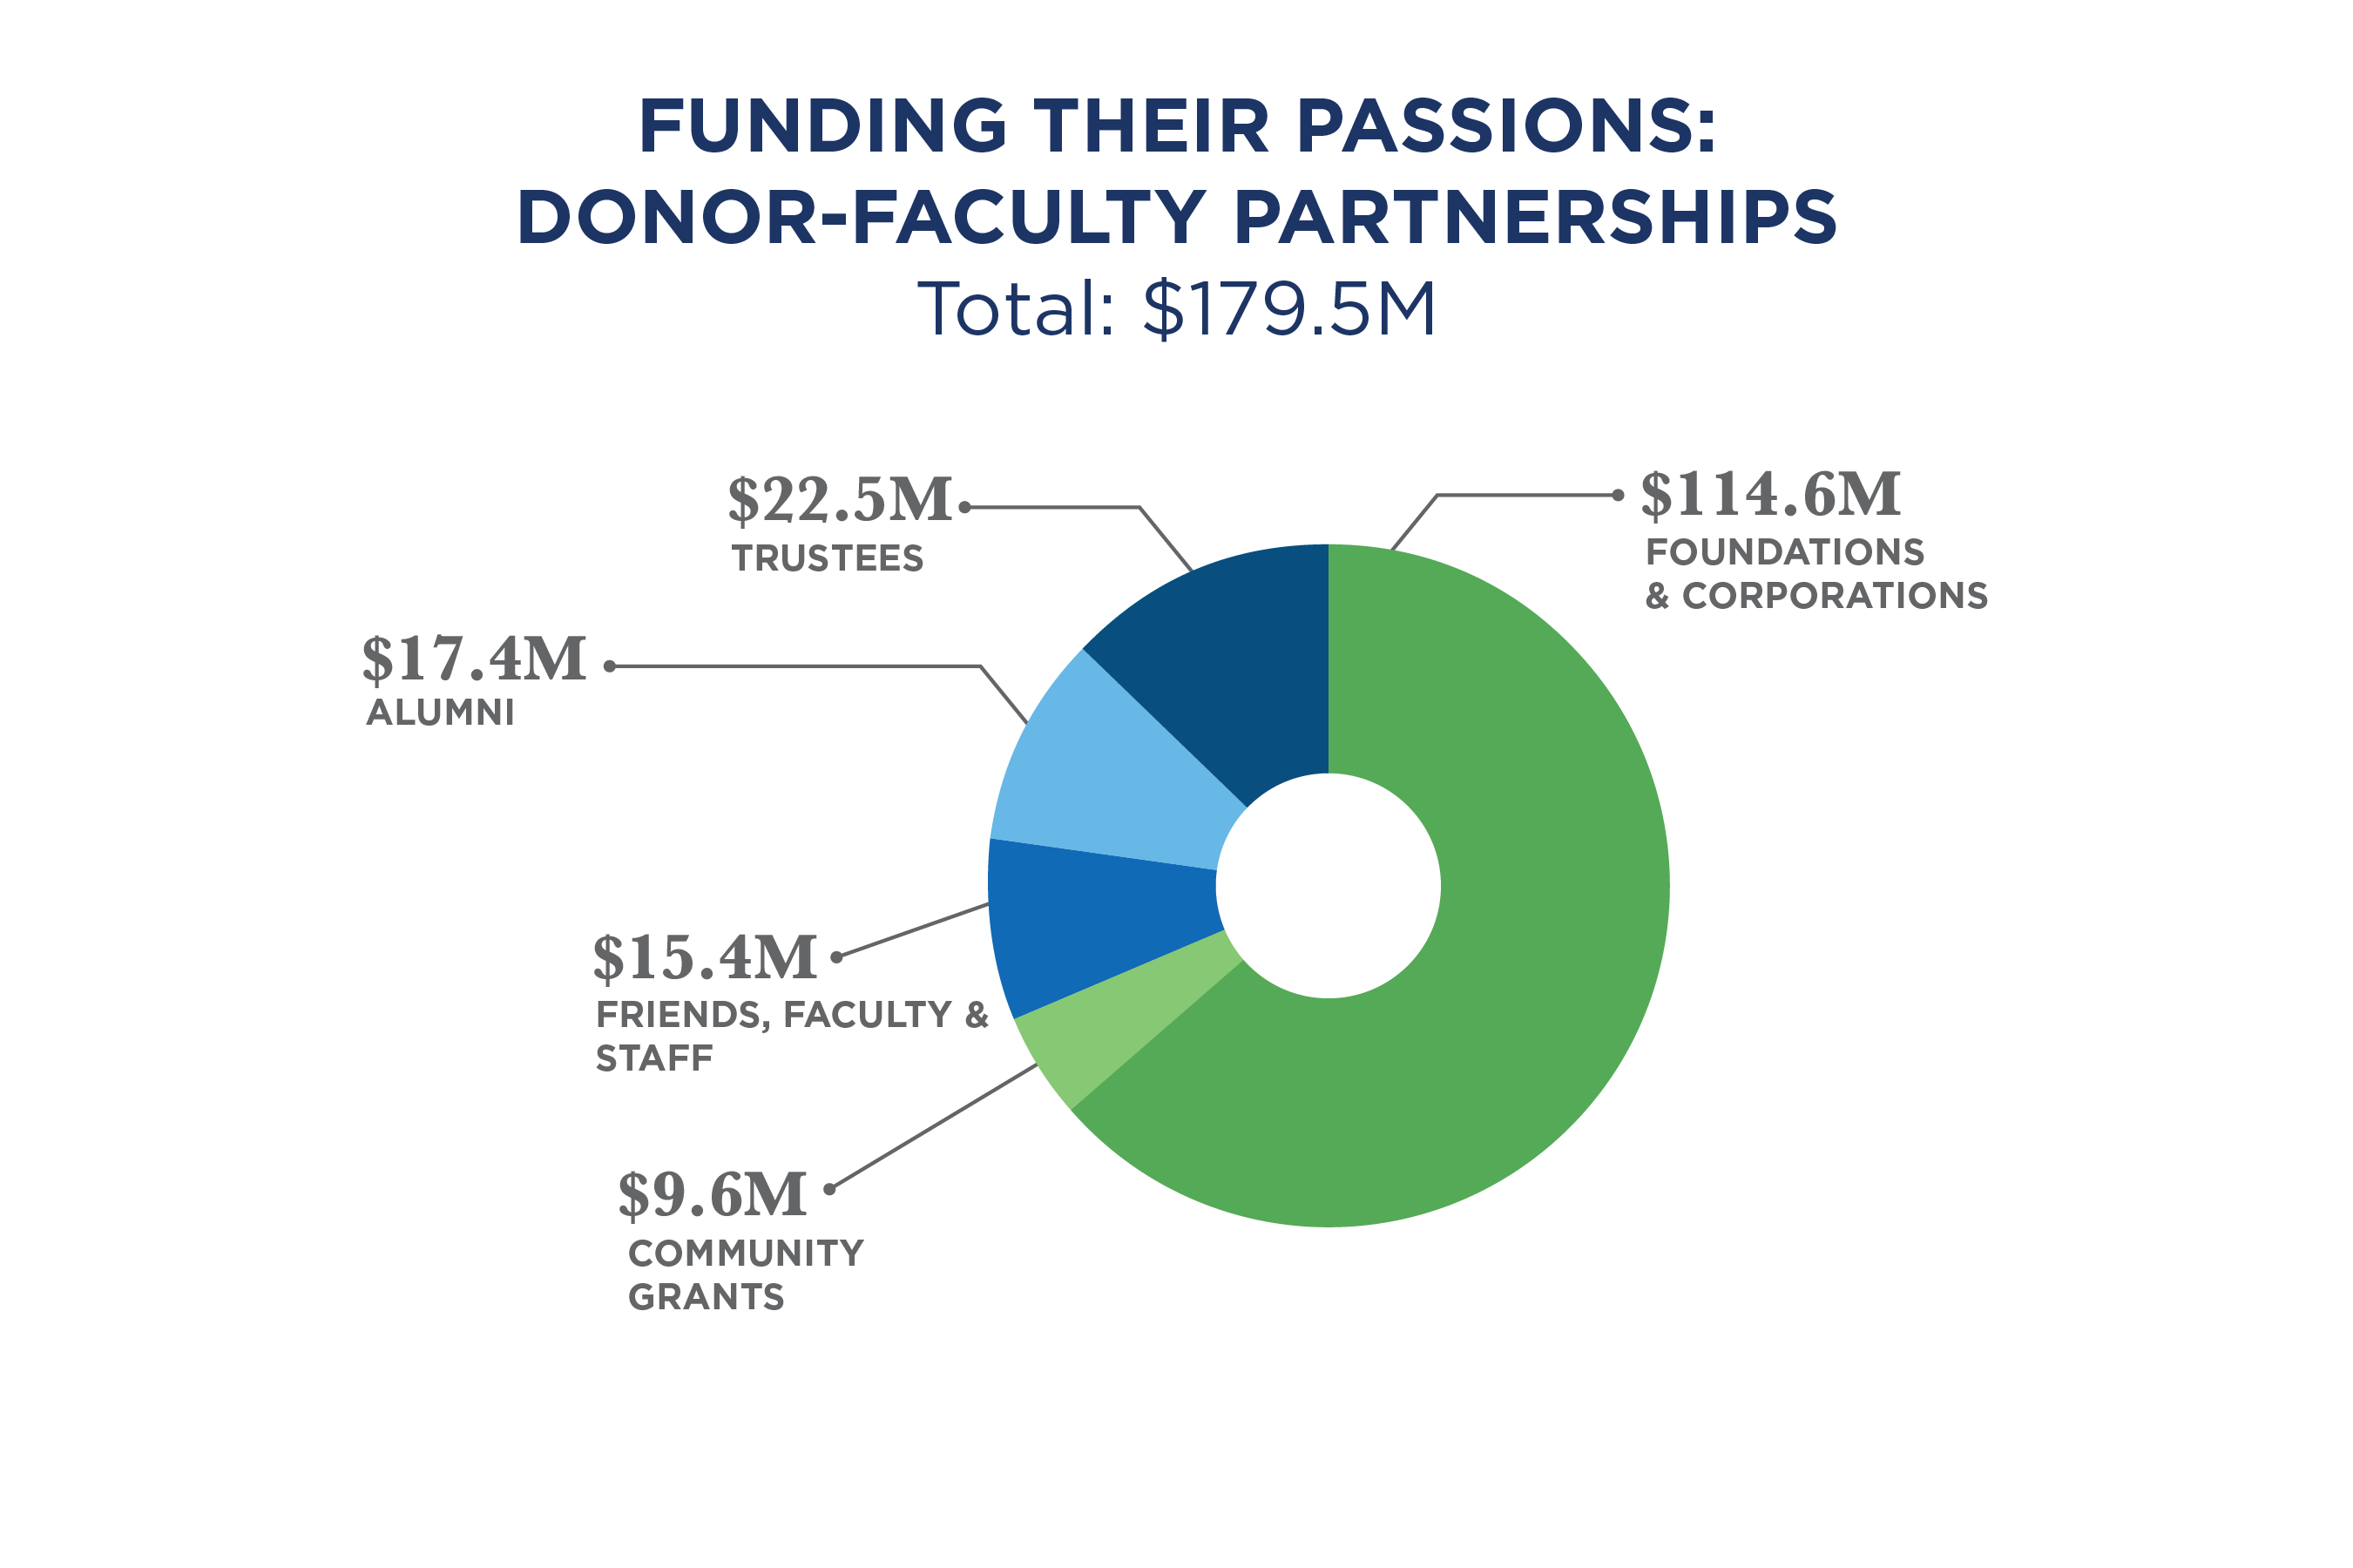 Chart showing Giving to Support Faculty & Programs by constituency, 64% ($114.6M) from Foundations & Corporations, 13% ($22.5M) from Trustees, 10% ($17.4M) from Alumni, 8% ($14.9M) from Friends, 5% ($9.6M) from Government Grants, and .3% ($.5M) from Faculty & Staff